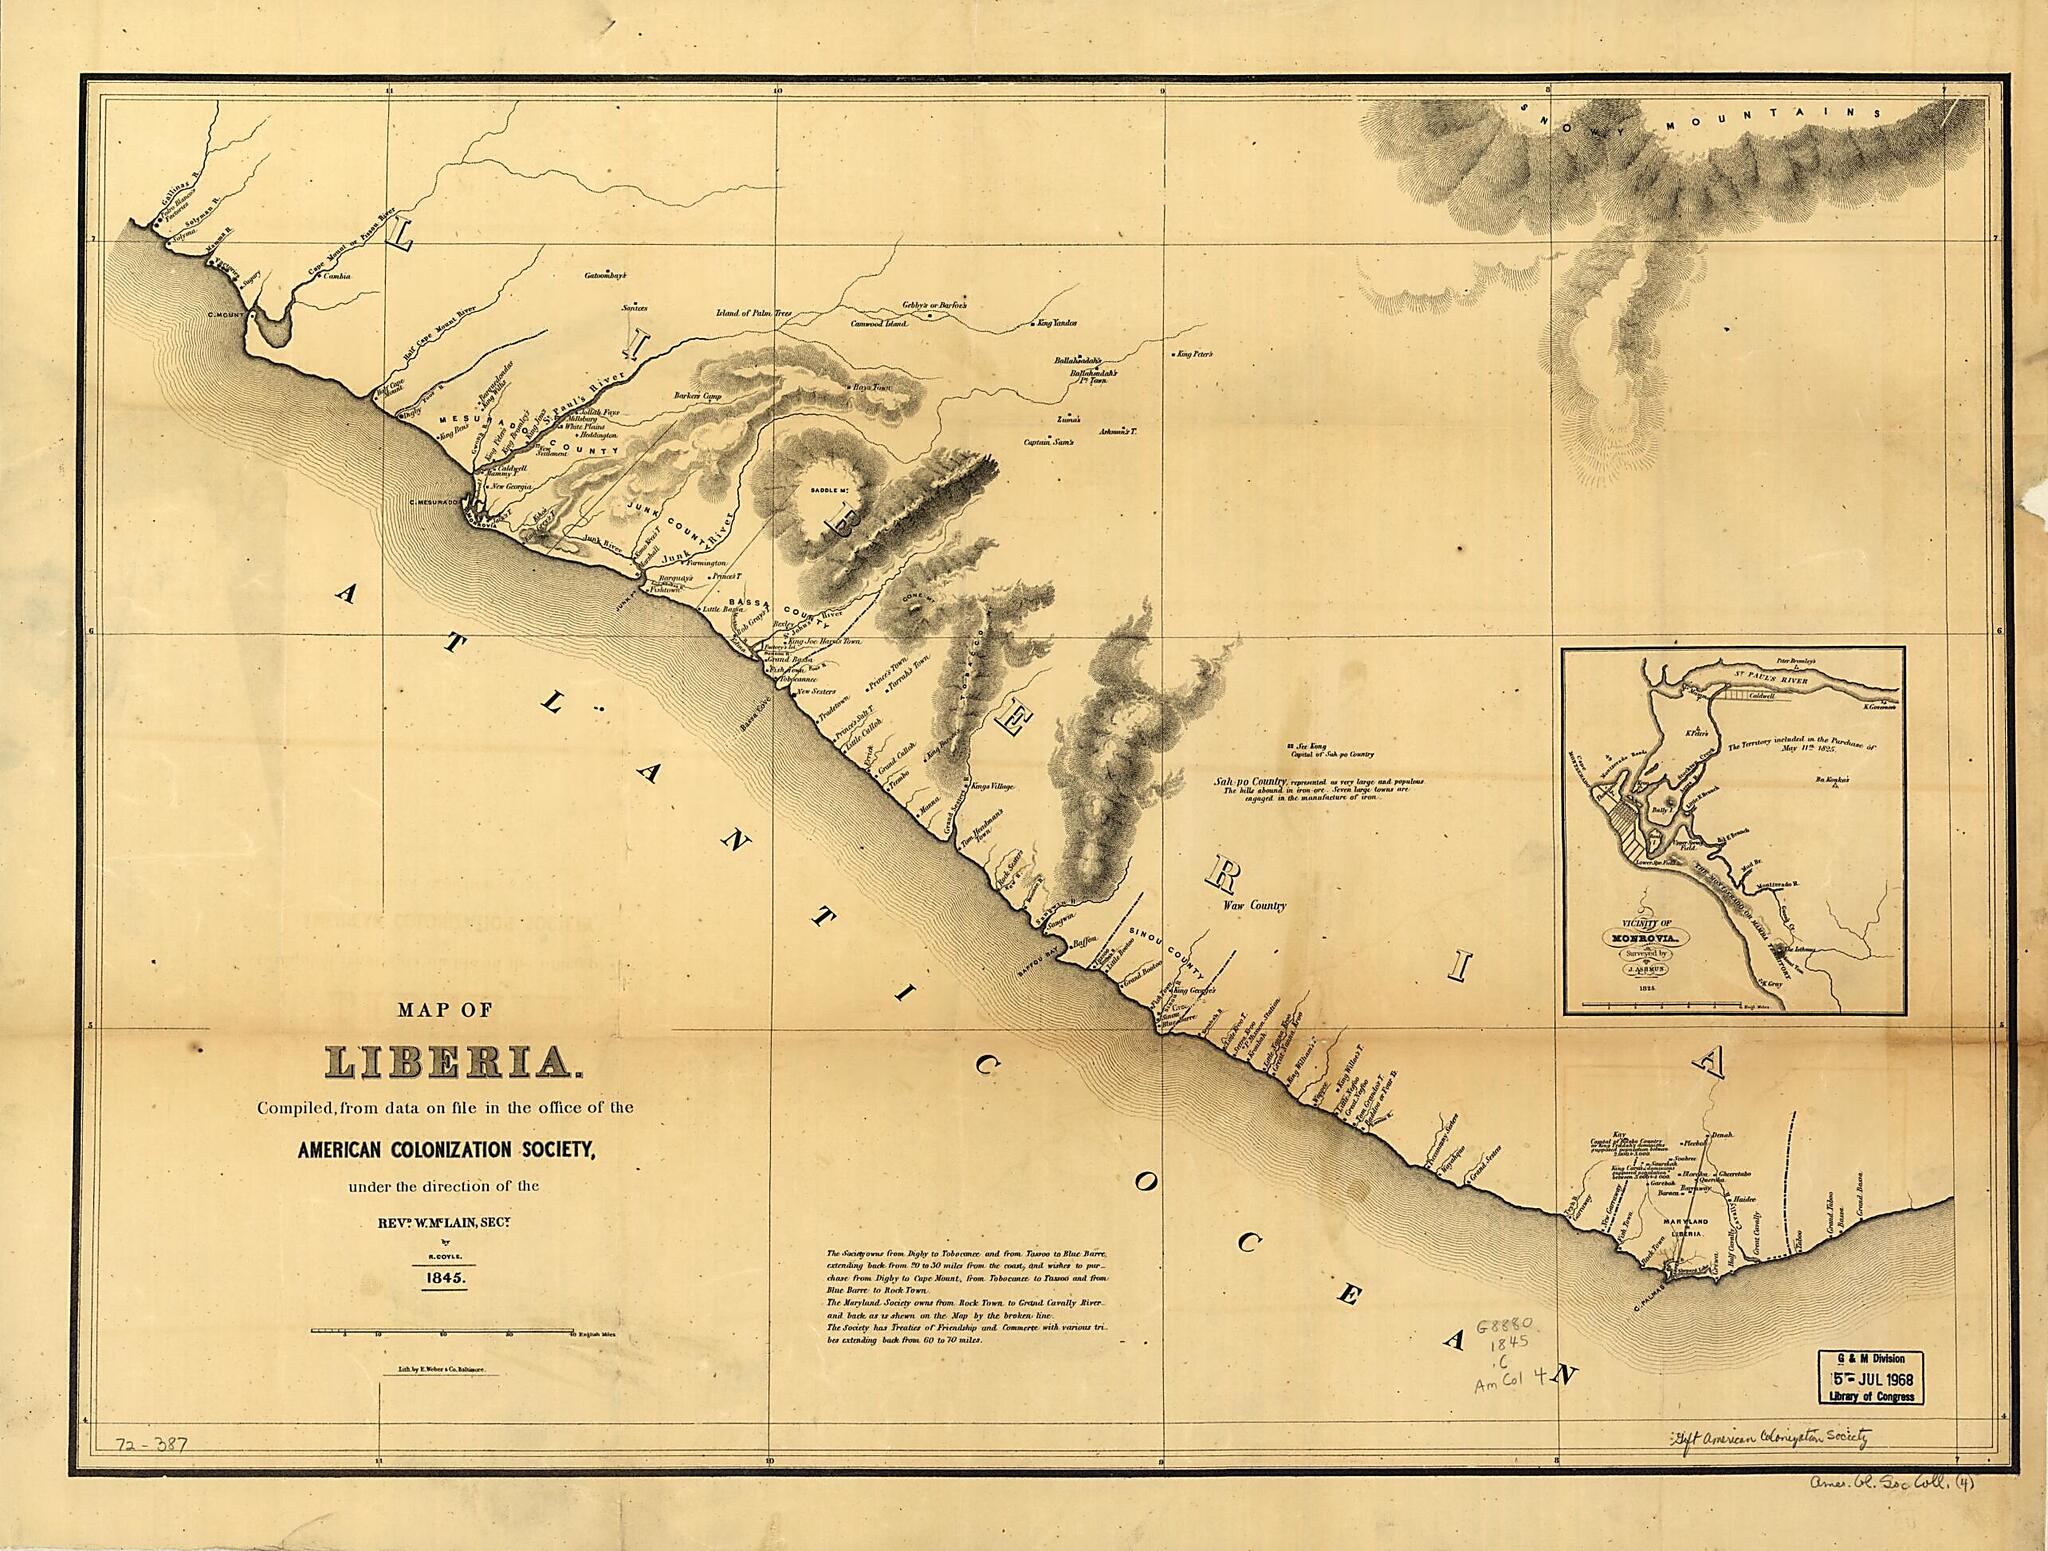 This old map of Map of Liberia from 1845 was created by J. (Jehudi) Ashmun, Randolph Coyle,  Edward Weber &amp; Co, W. (William) M&